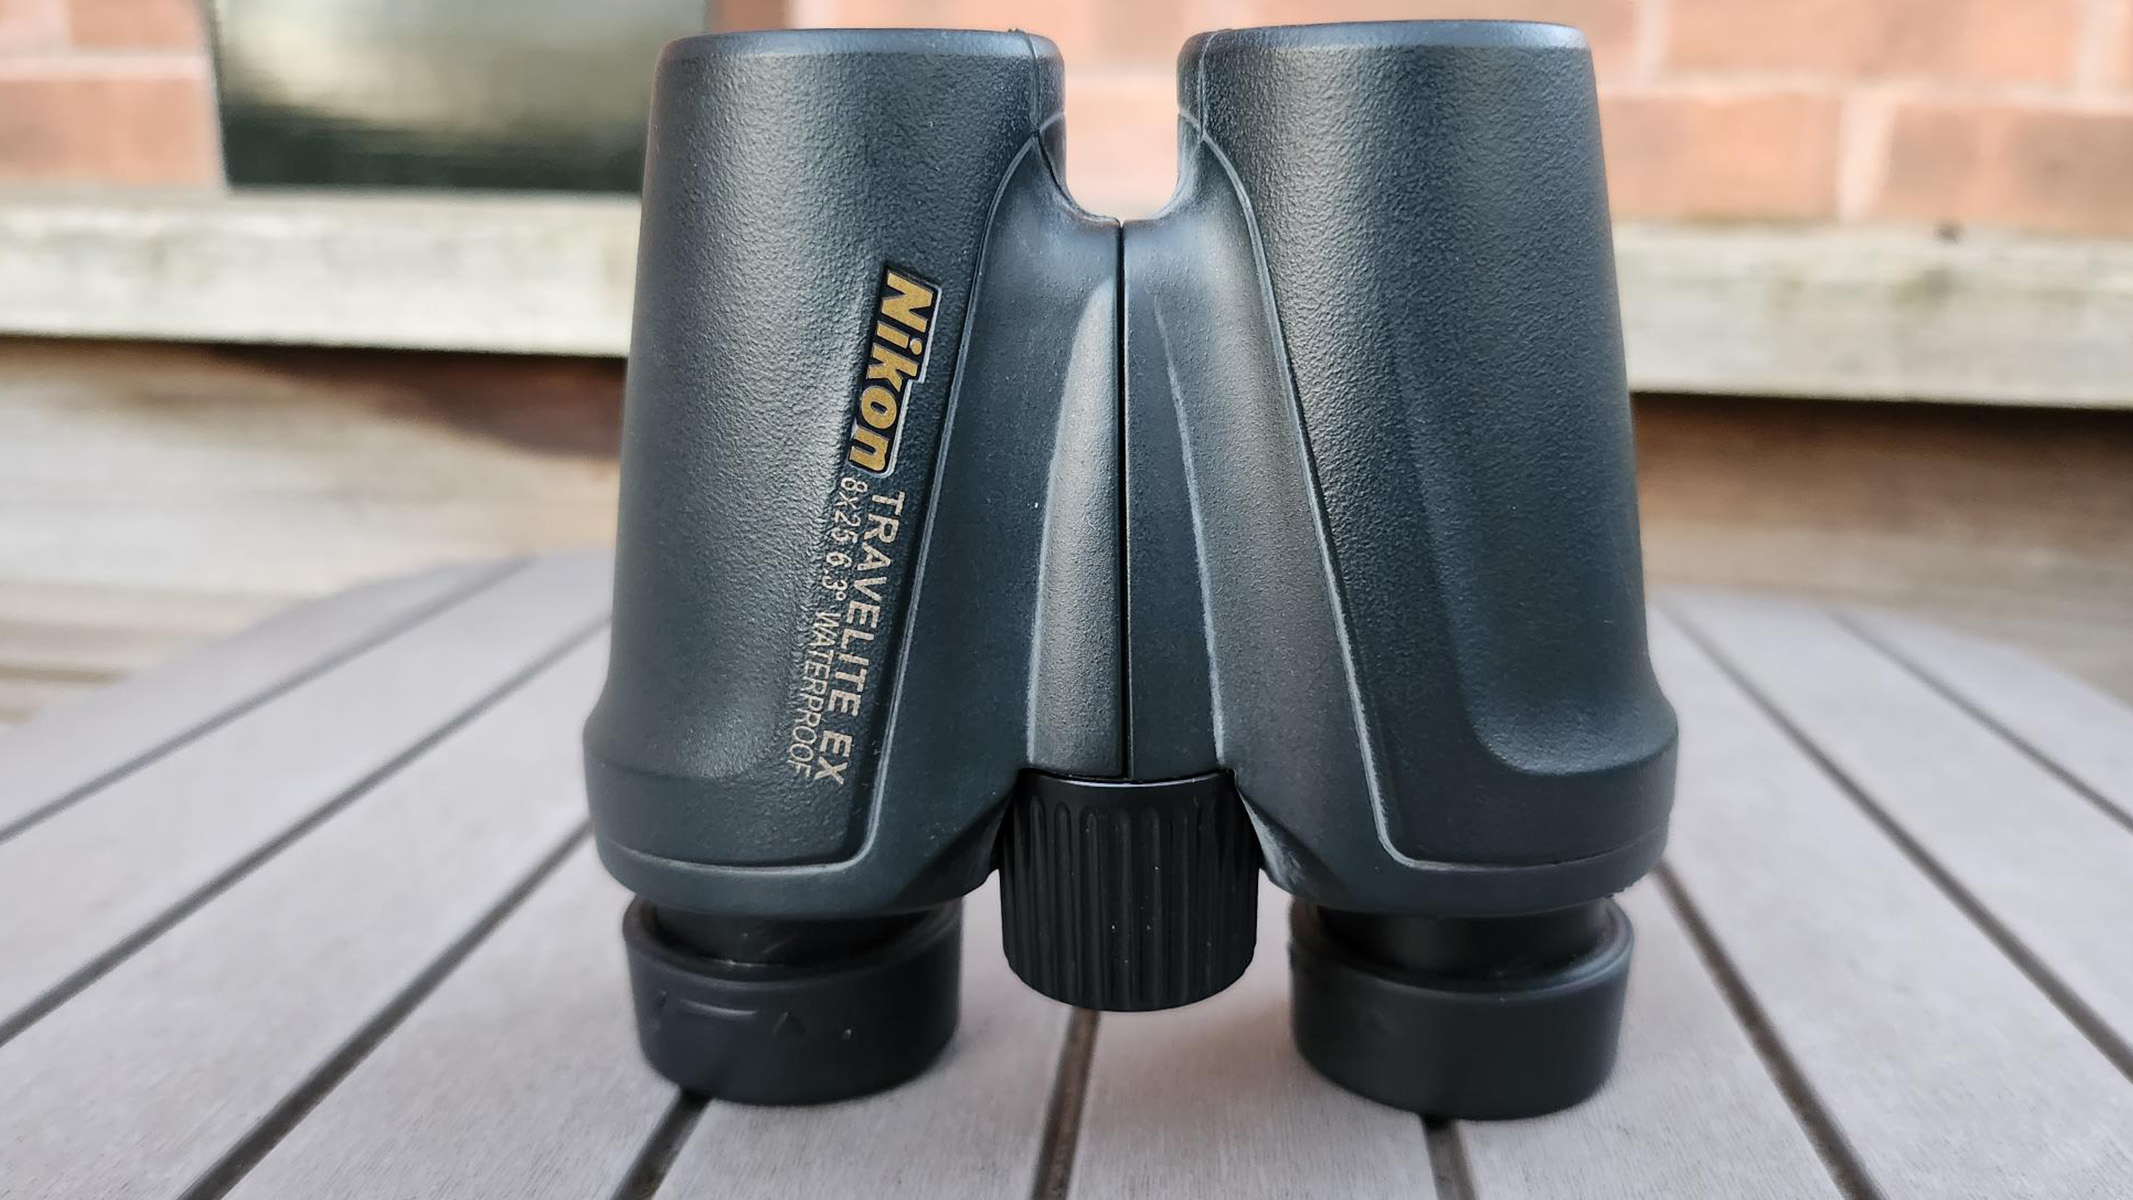 Photo shows the Nikon Travelite EX 8x25 binoculars on a table showing the central focusing dial